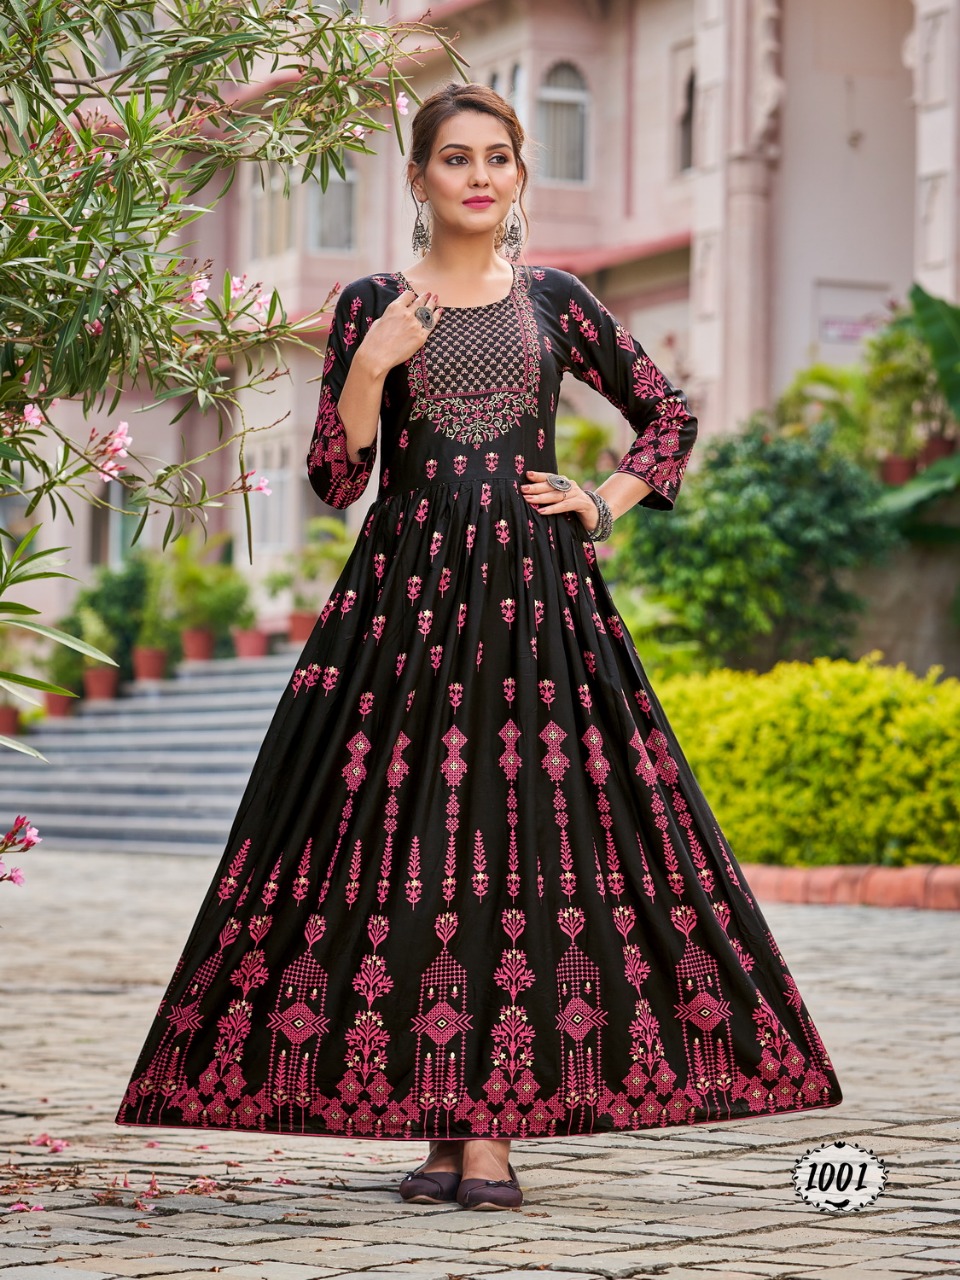 Banwery Fashion flora rayon new and modern style gown catalog